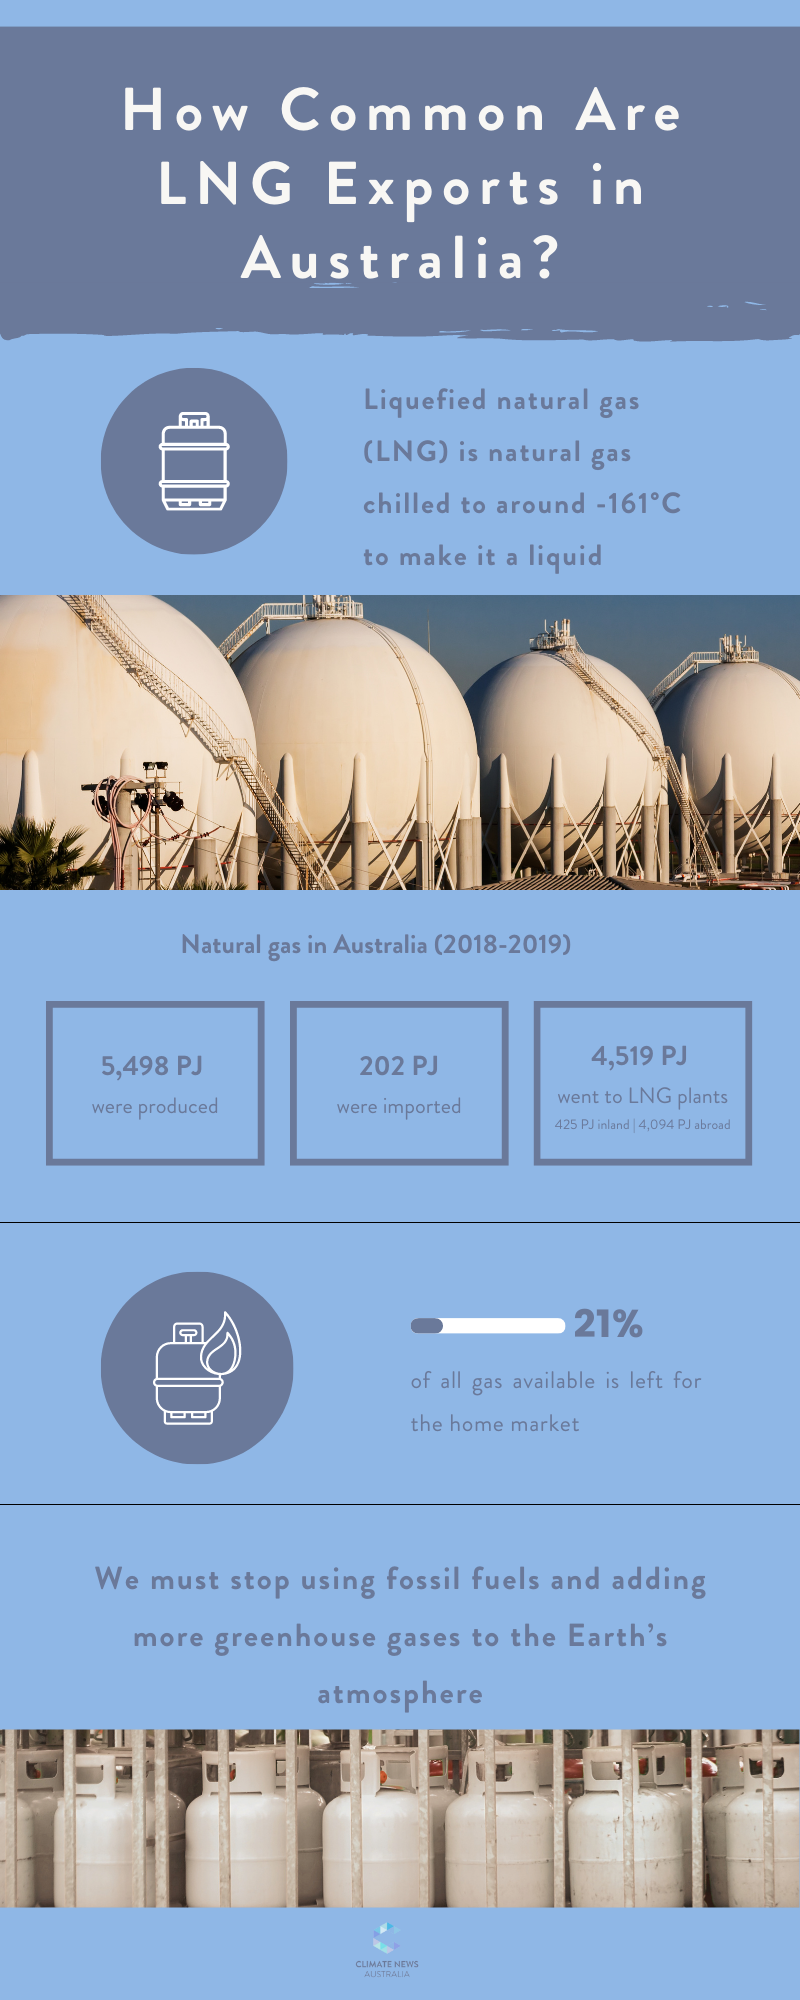 Infographic on LNG exports in Australia